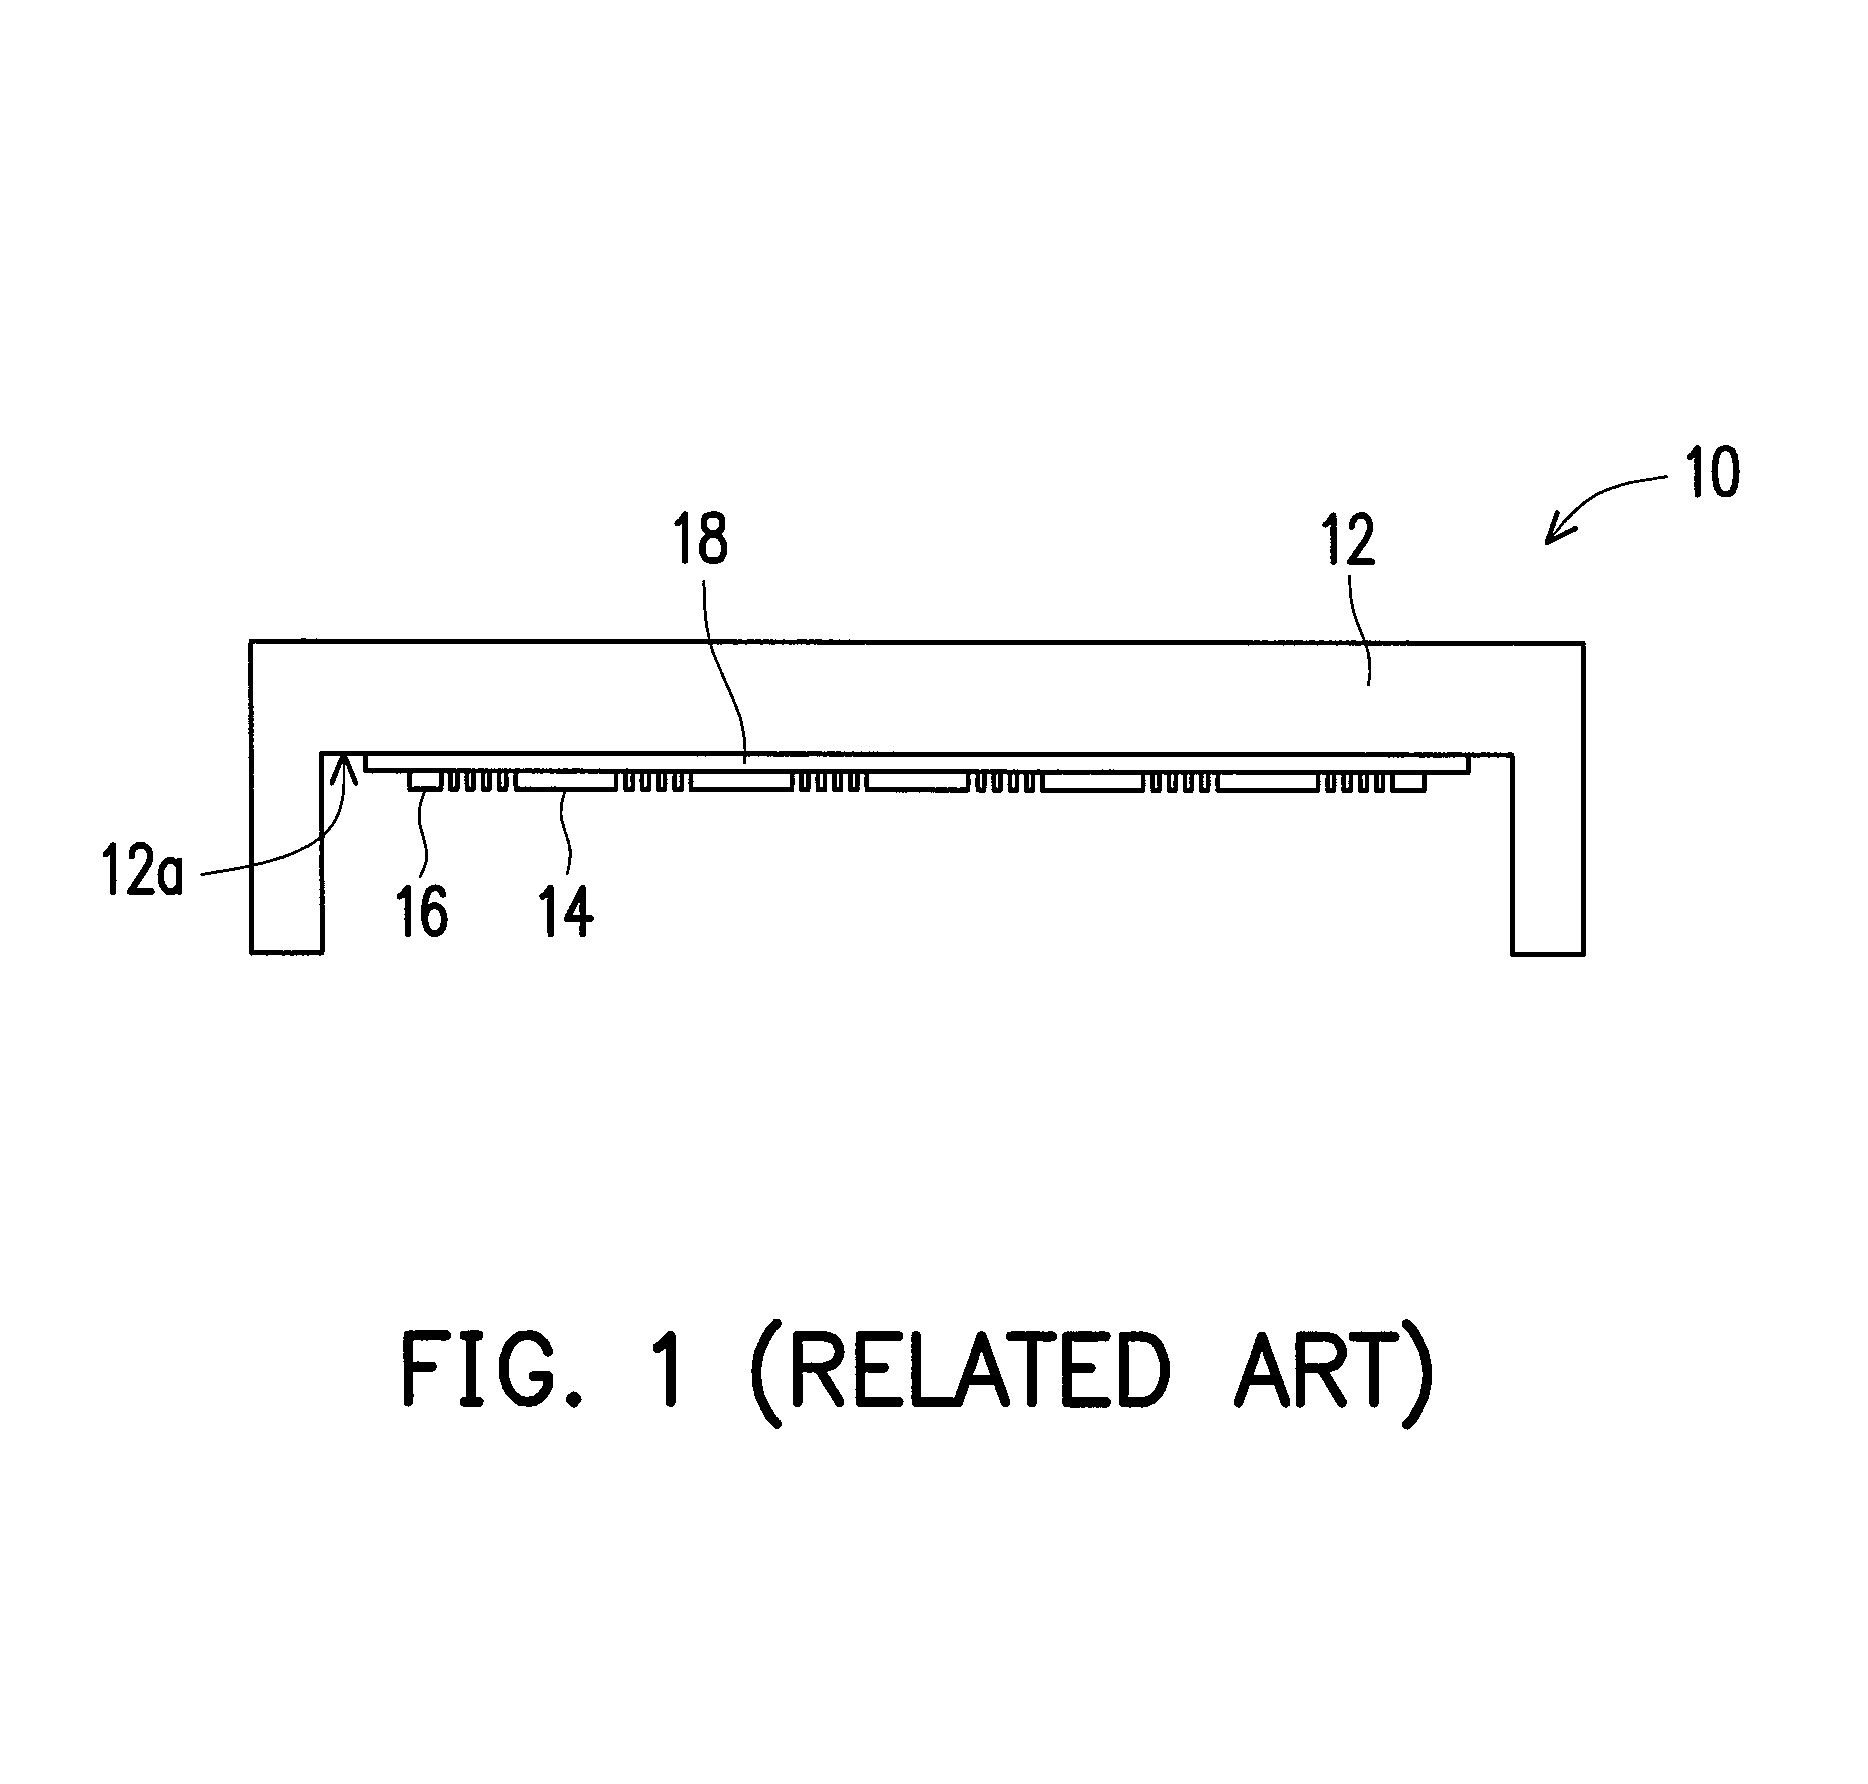 Electronic apparatus and touch cover